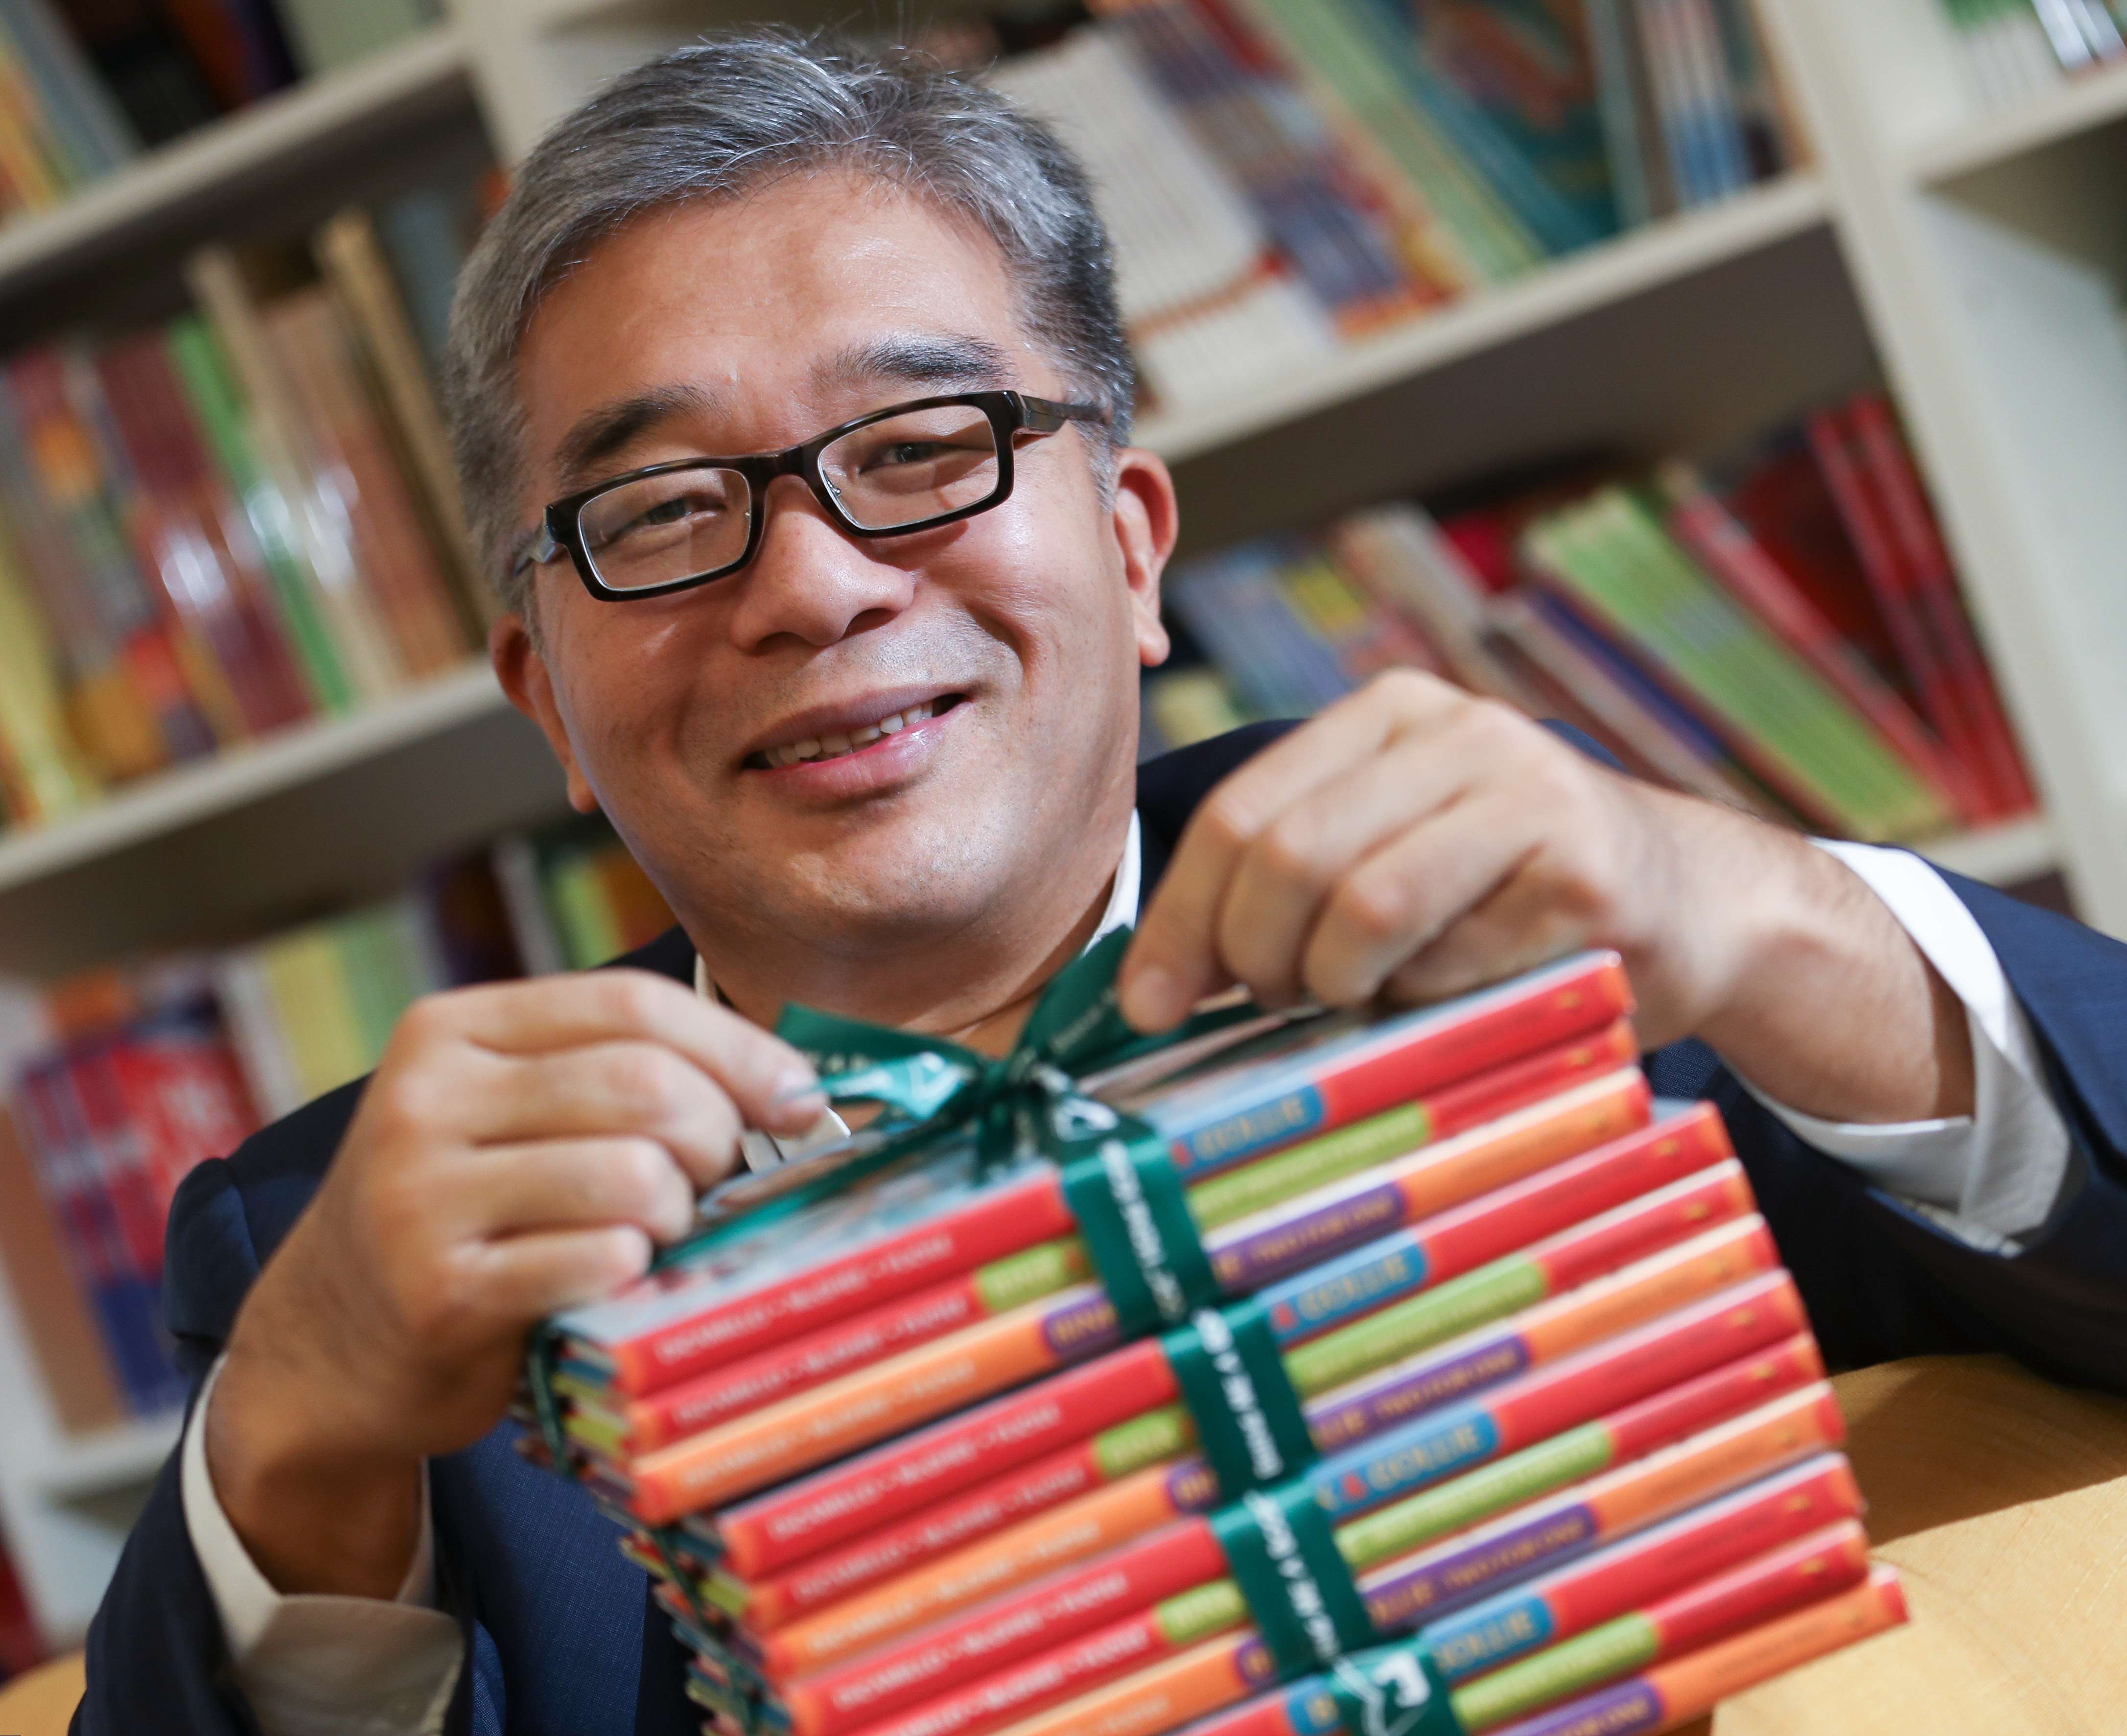 James Chen says getting children to read at an early age encourages lifelong learning. Photo: Nora Tam